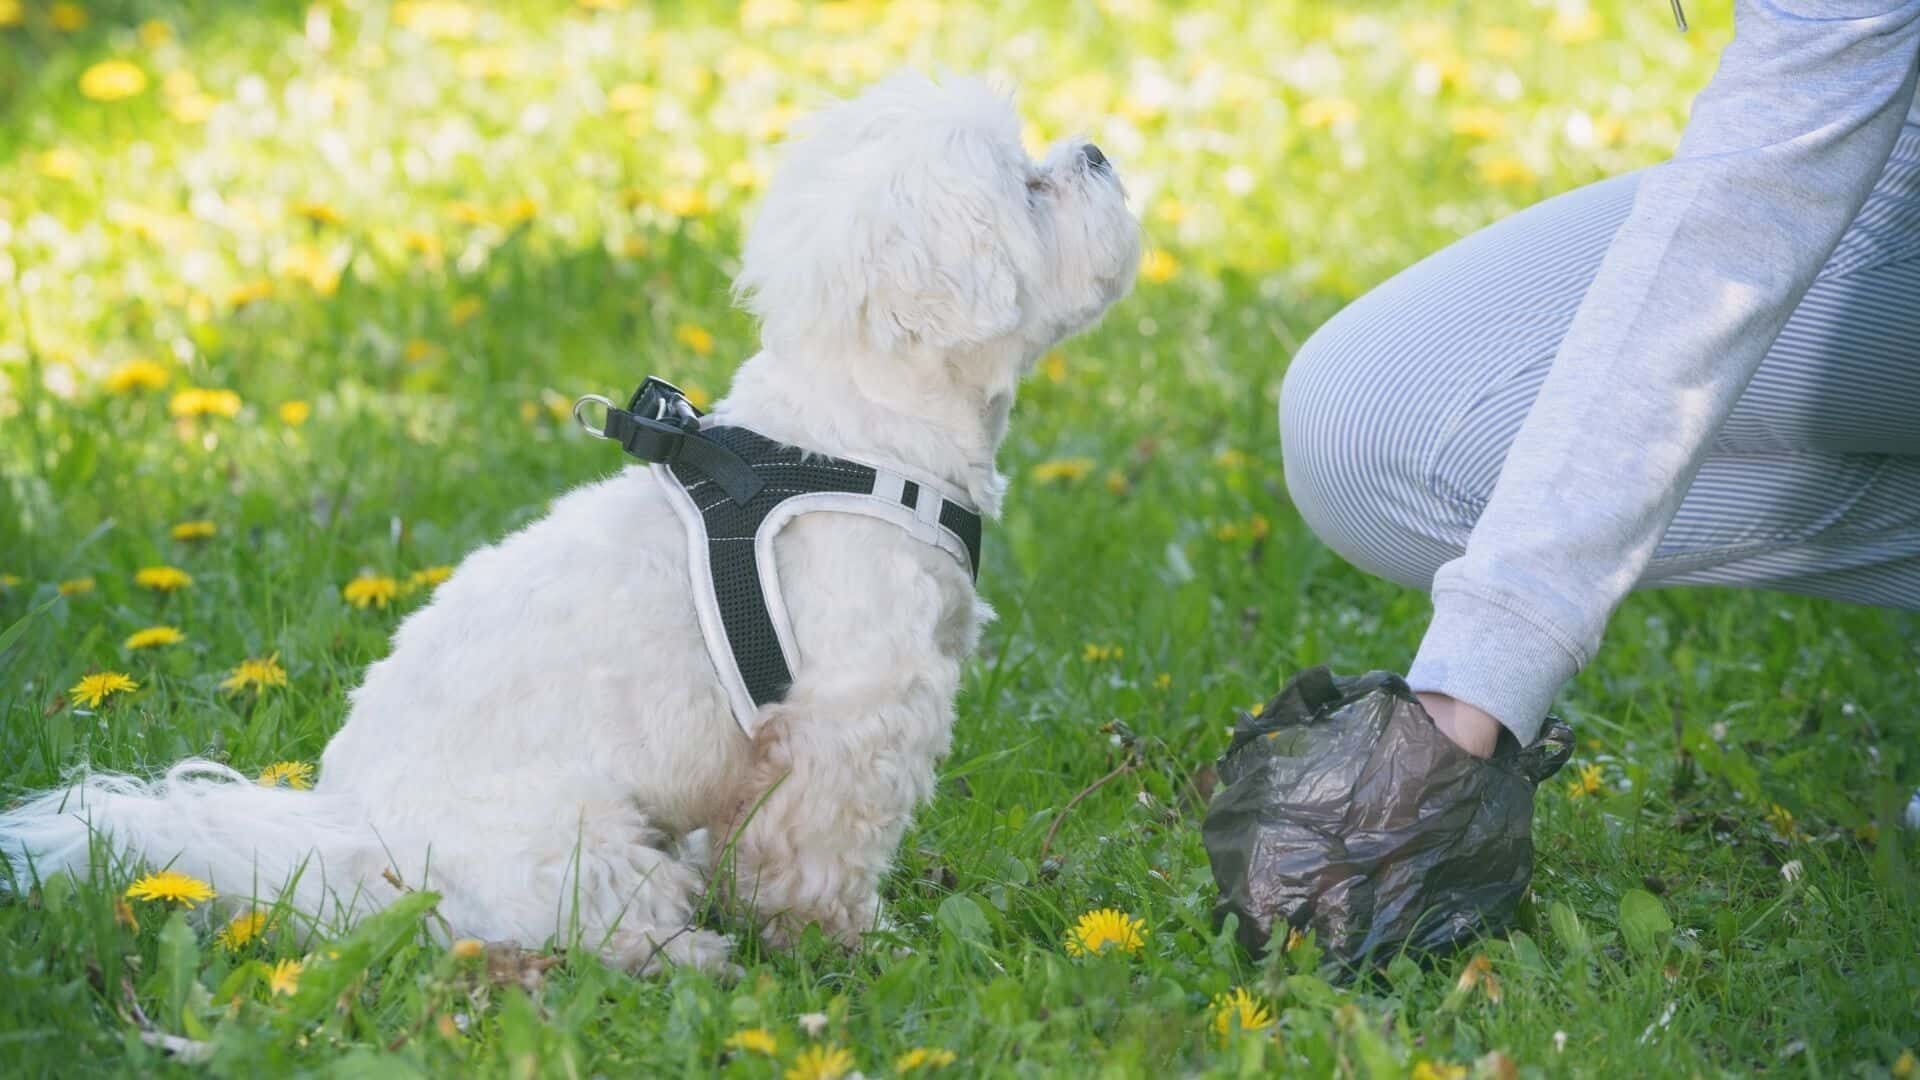 How to dispose of dog poop without smell?